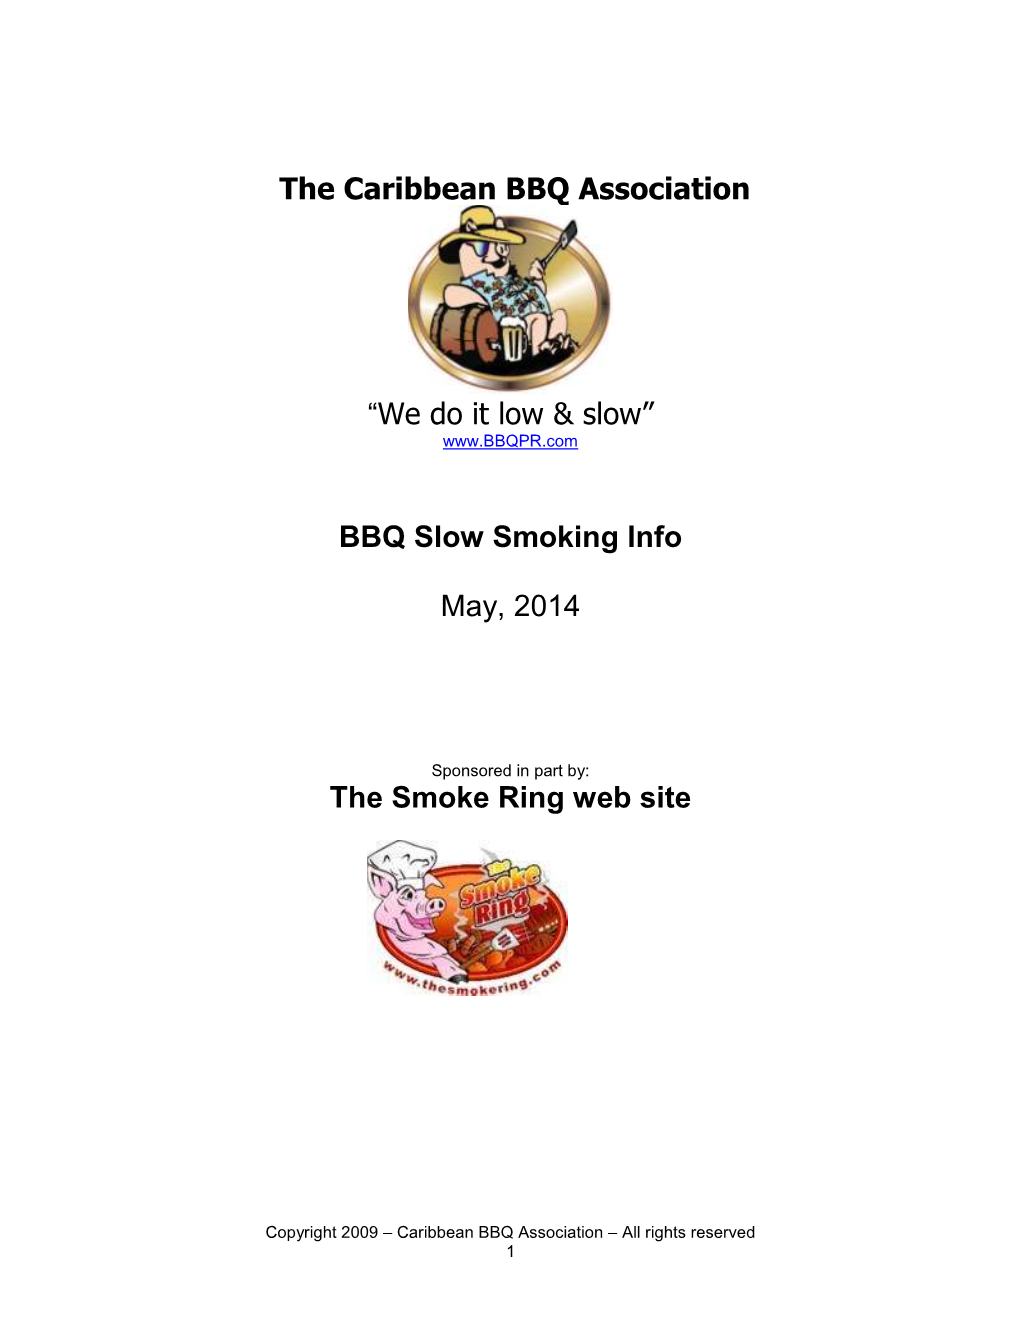 The Caribbean BBQ Association “We Do It Low & Slow”